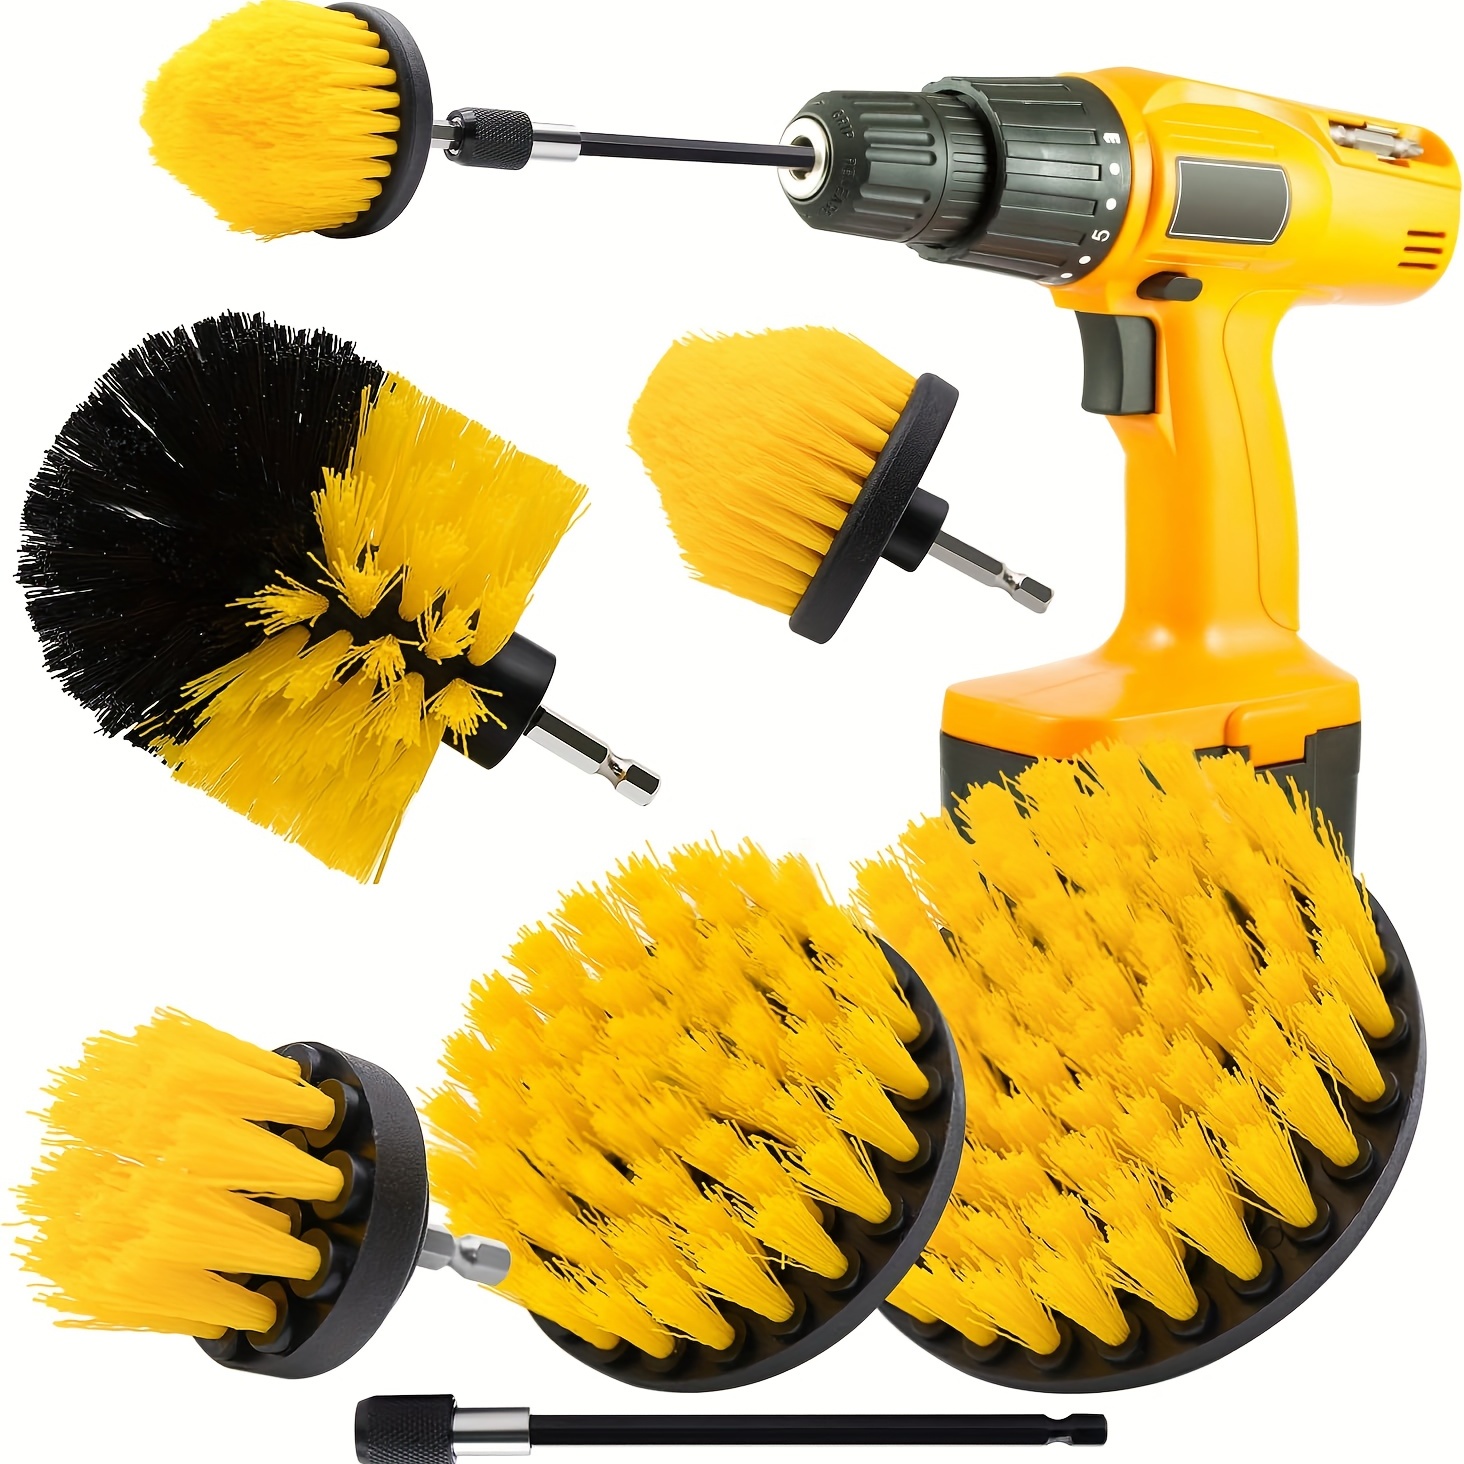 1pc Electric Power Drill Scrubber Nylon Cleaning Brush For Bathtub Carpet  Glass Tires Toilet Floors Rust Remover Car Cleaner Kit